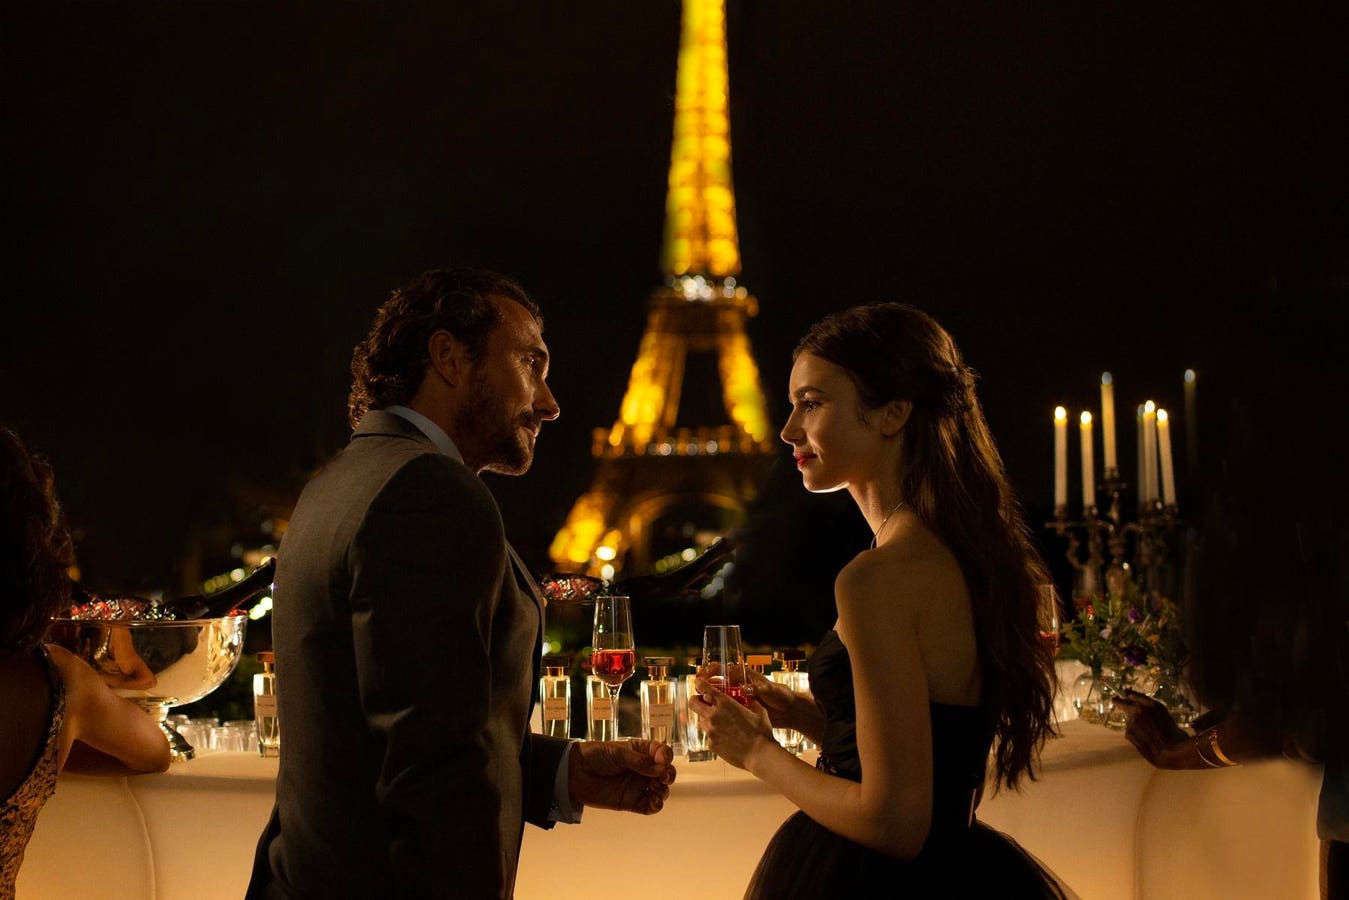 Want To Travel To France? Unique New Partnership Inspires French Tourism Via Netflix